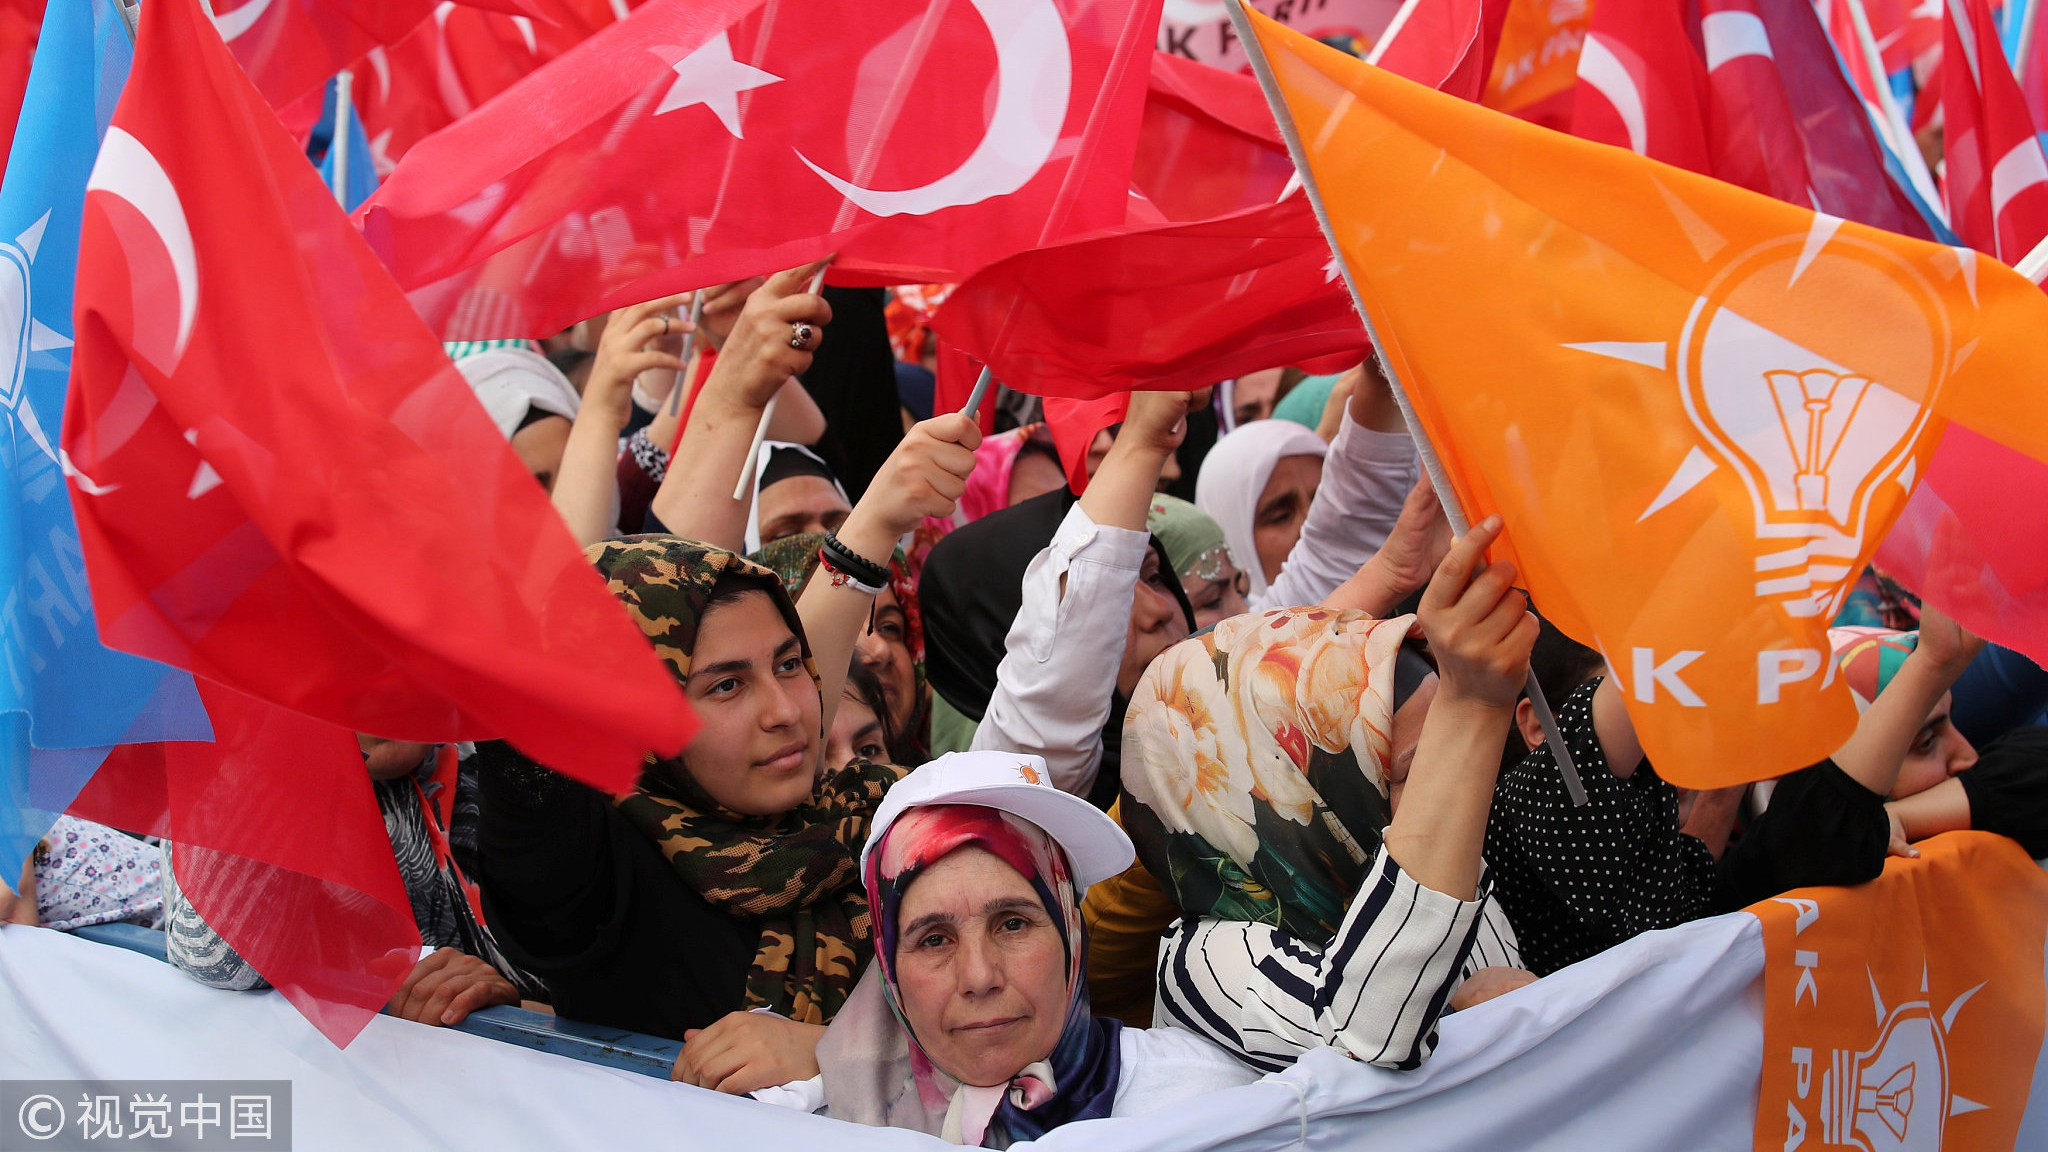 The upcoming Turkish elections, a historic moment